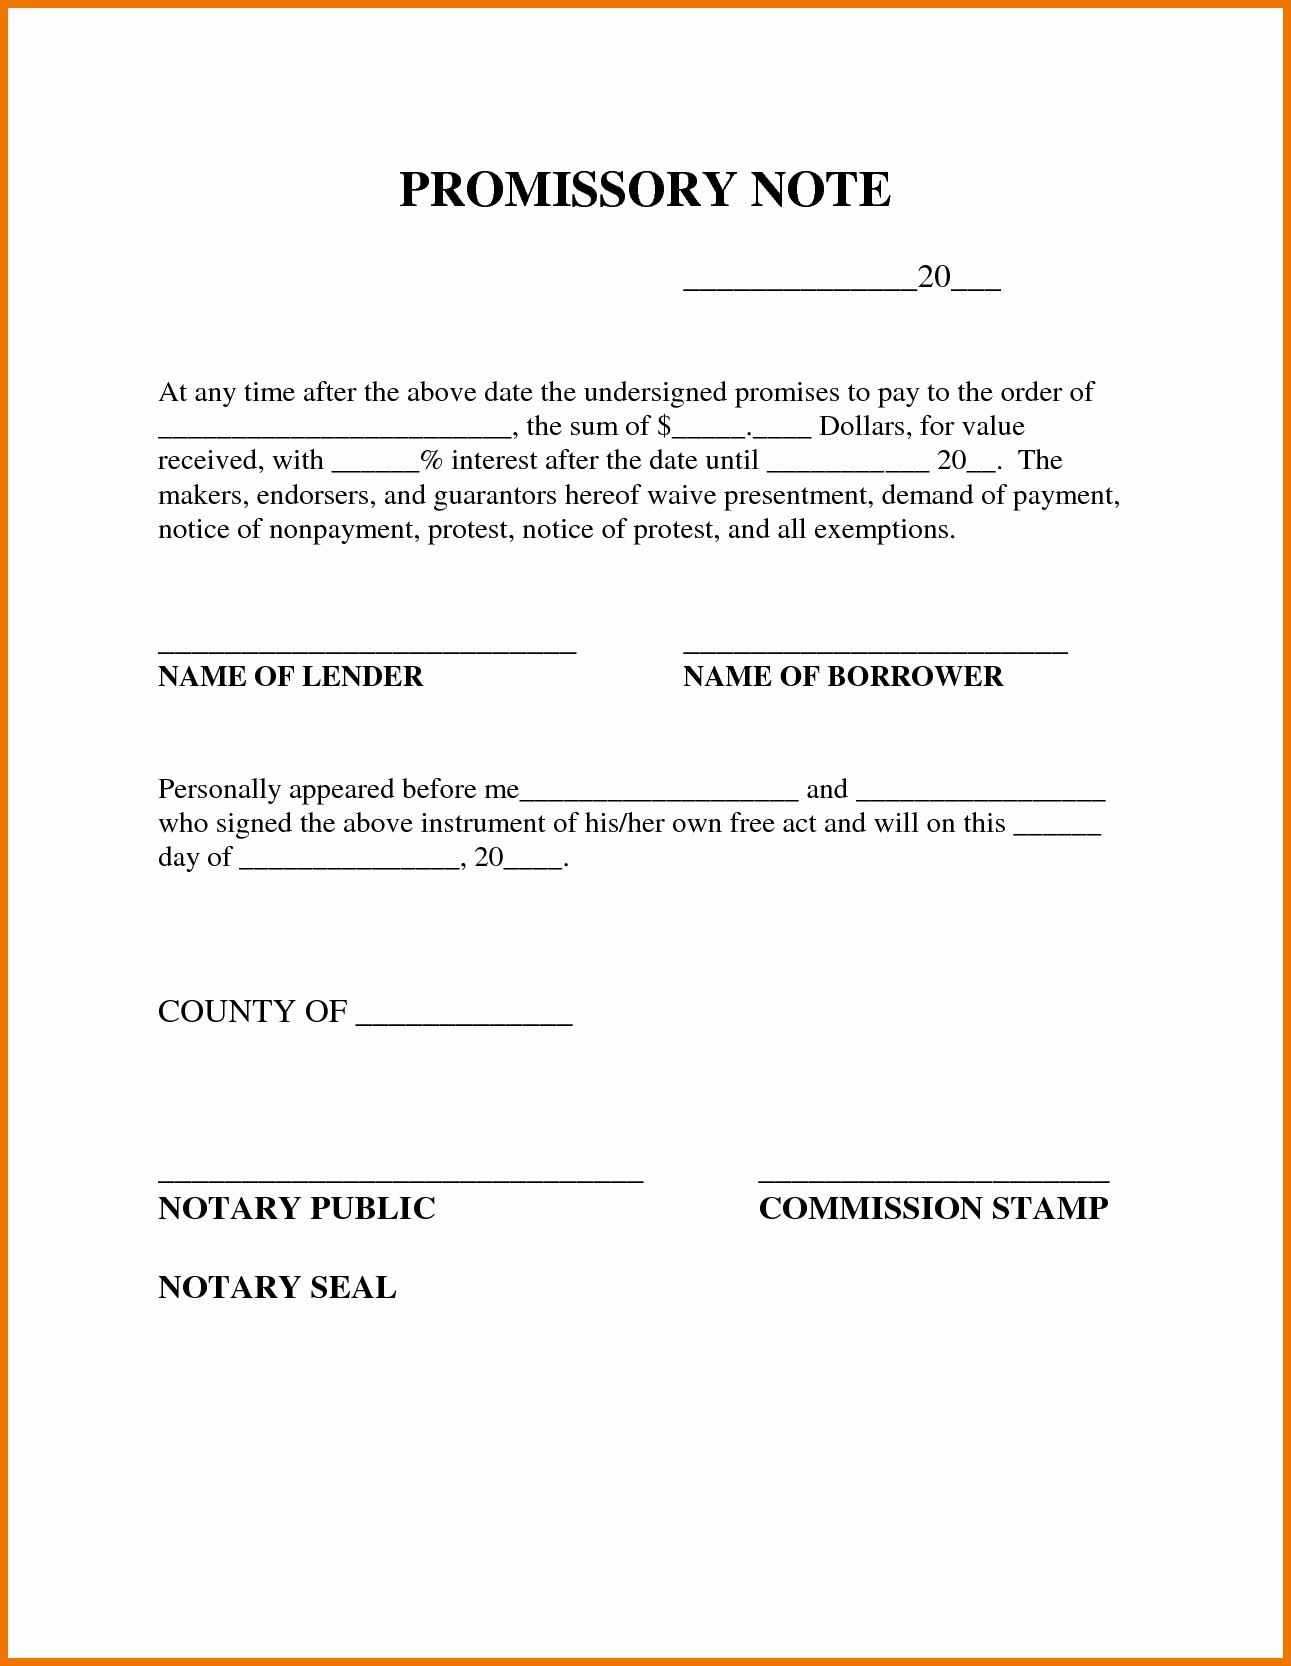 50 New Sample Promissory Note For Business Loan DOCUMENTS IDEAS